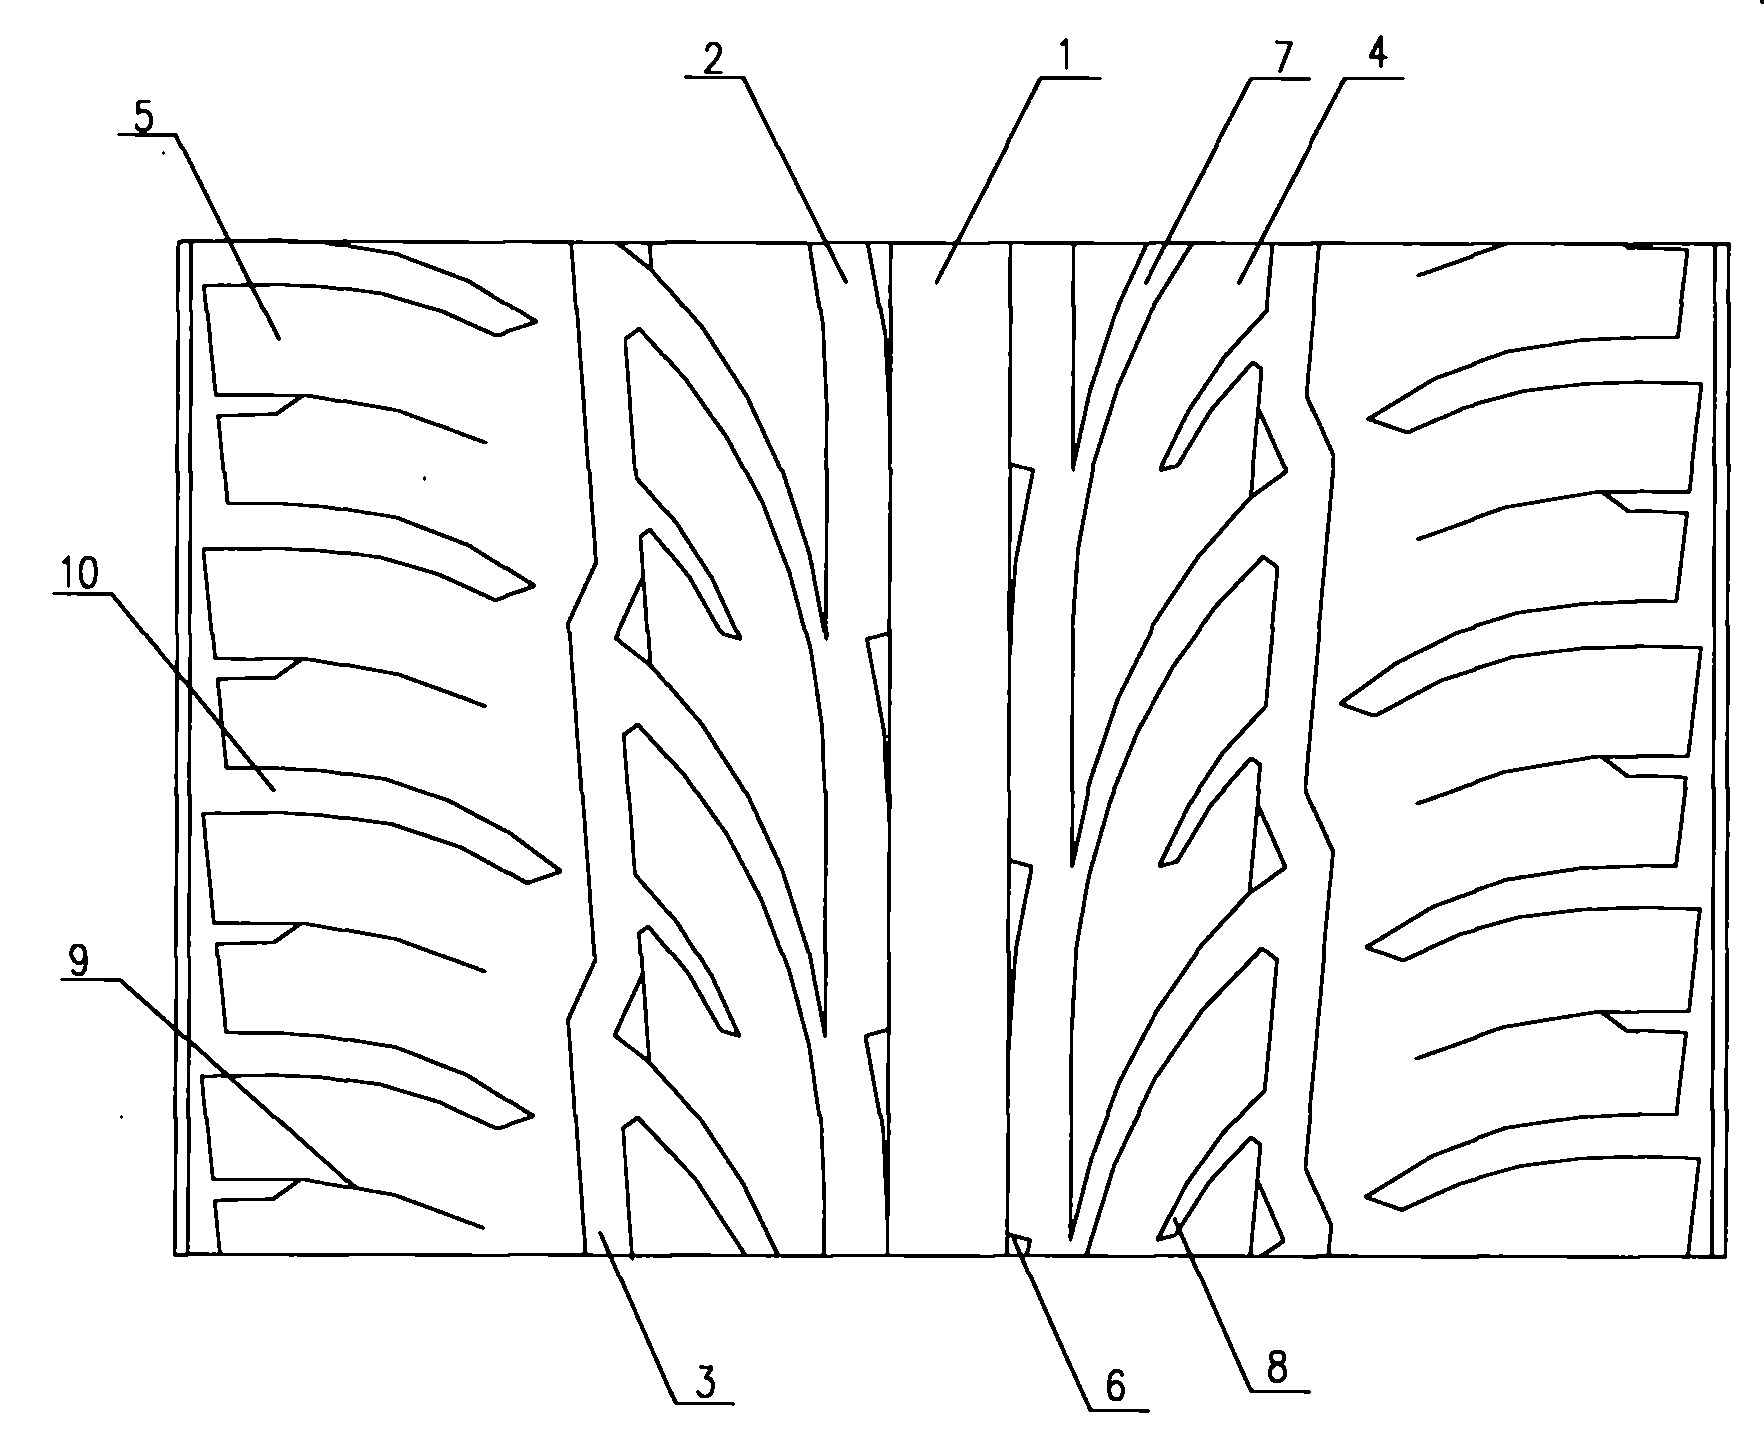 Tread of meridian tire for car